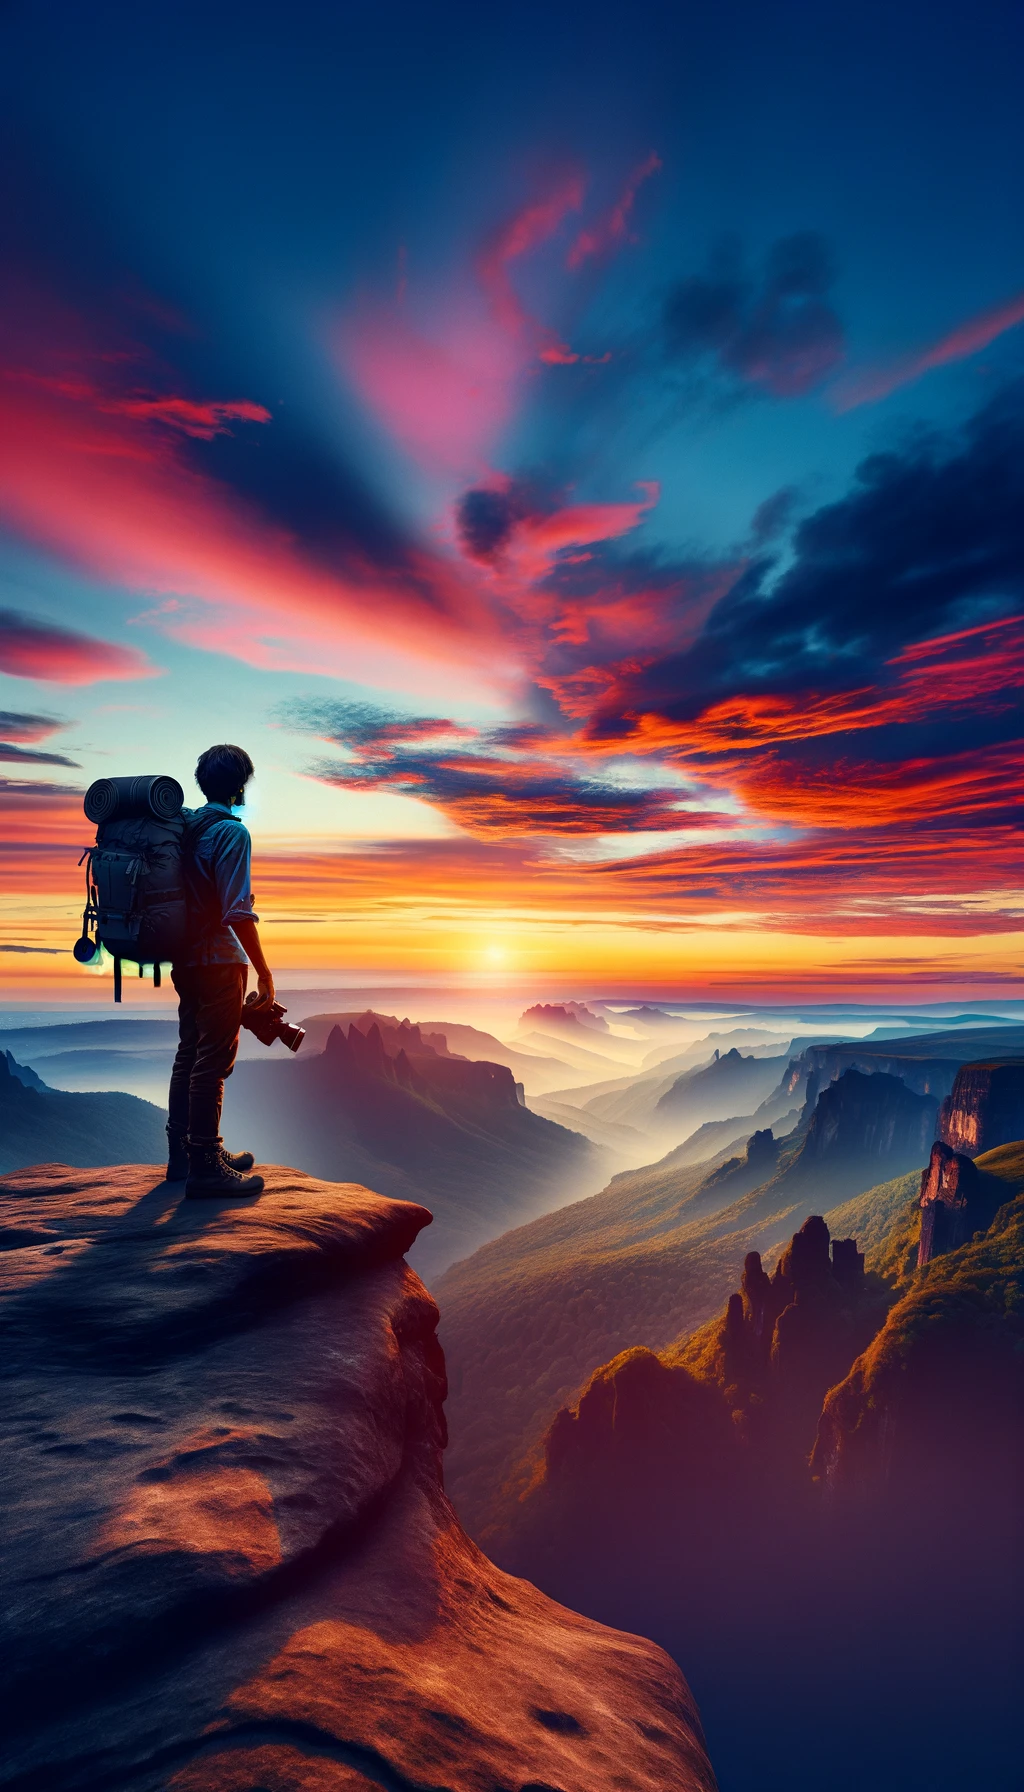 A person standing at the edge of a cliff, overlooking a vast landscape. The sky is painted with hues of orange and pink as the sun sets in the distance. The person appears contemplative, with their silhouette against the colorful sky. 